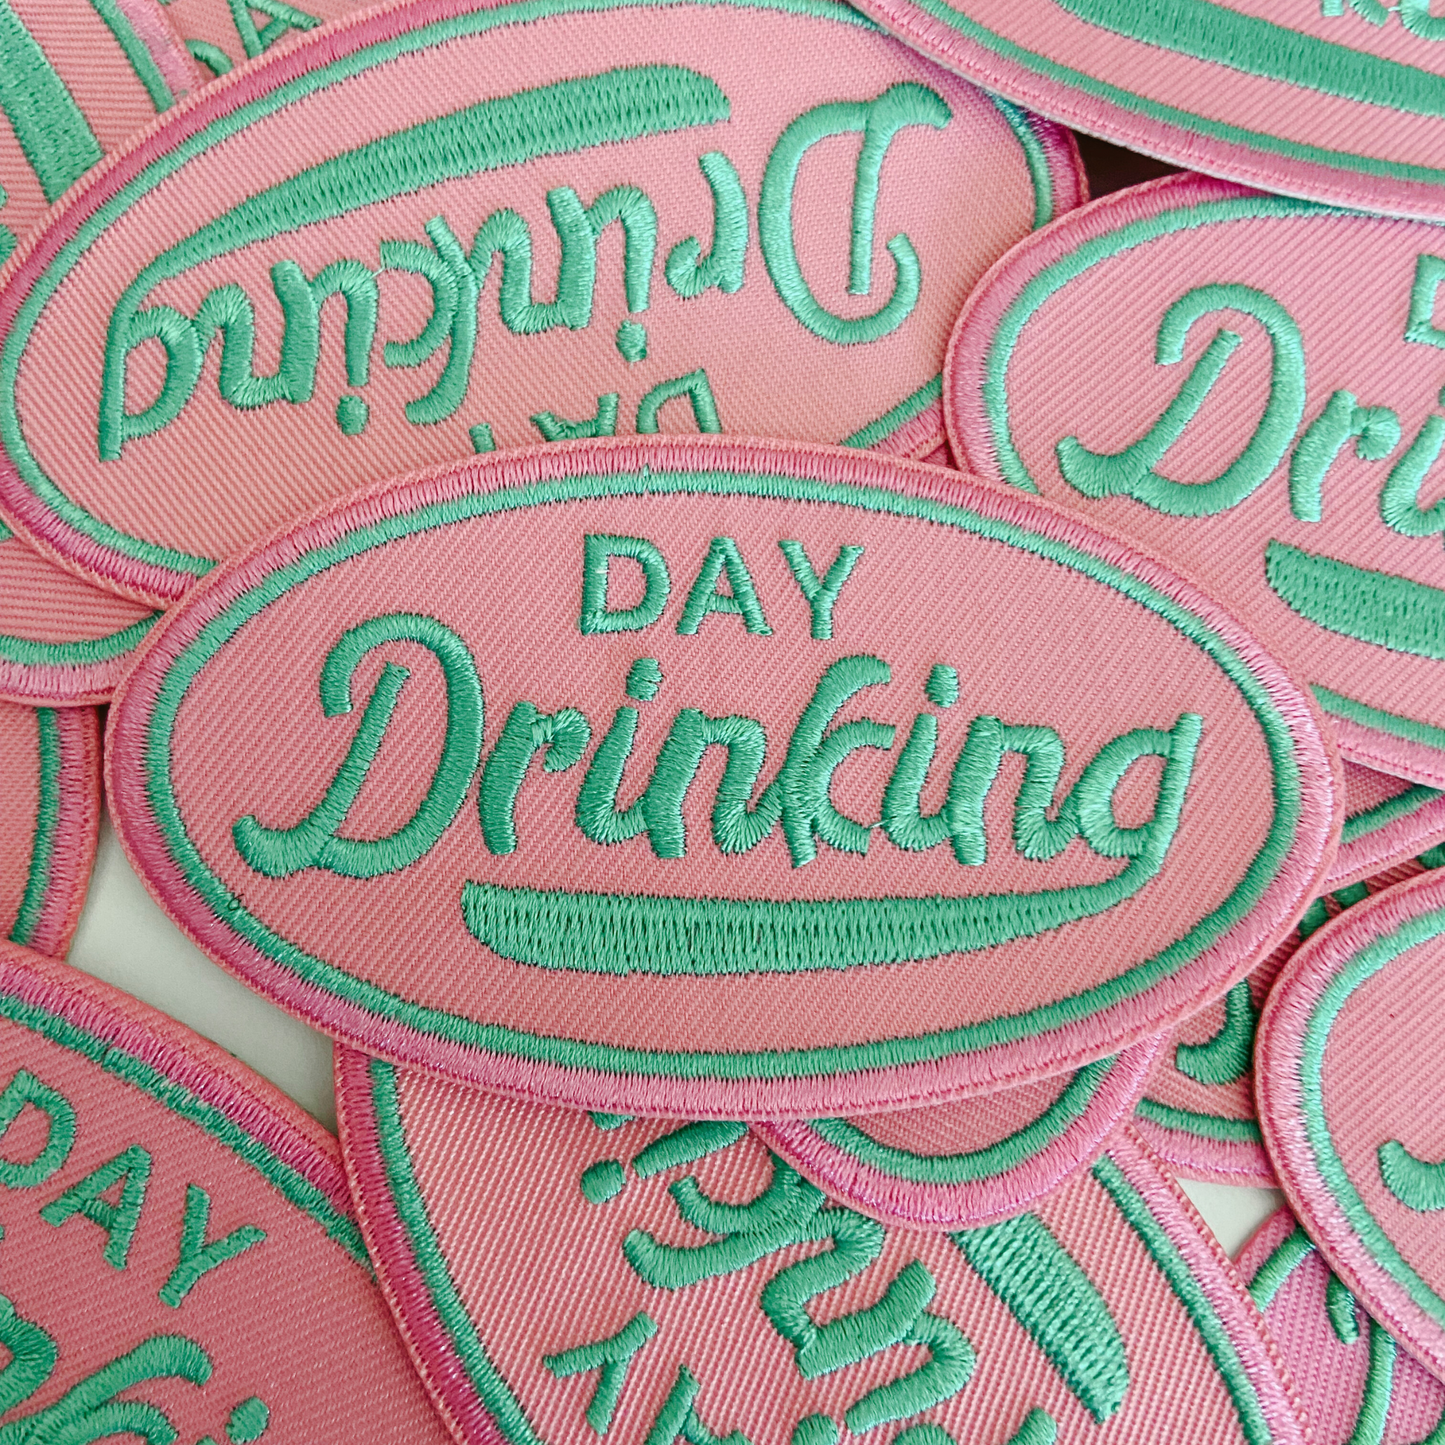 3.75" Day Drinking in Pink and Teal  -  Embroidered Hat Patch (Version 2)